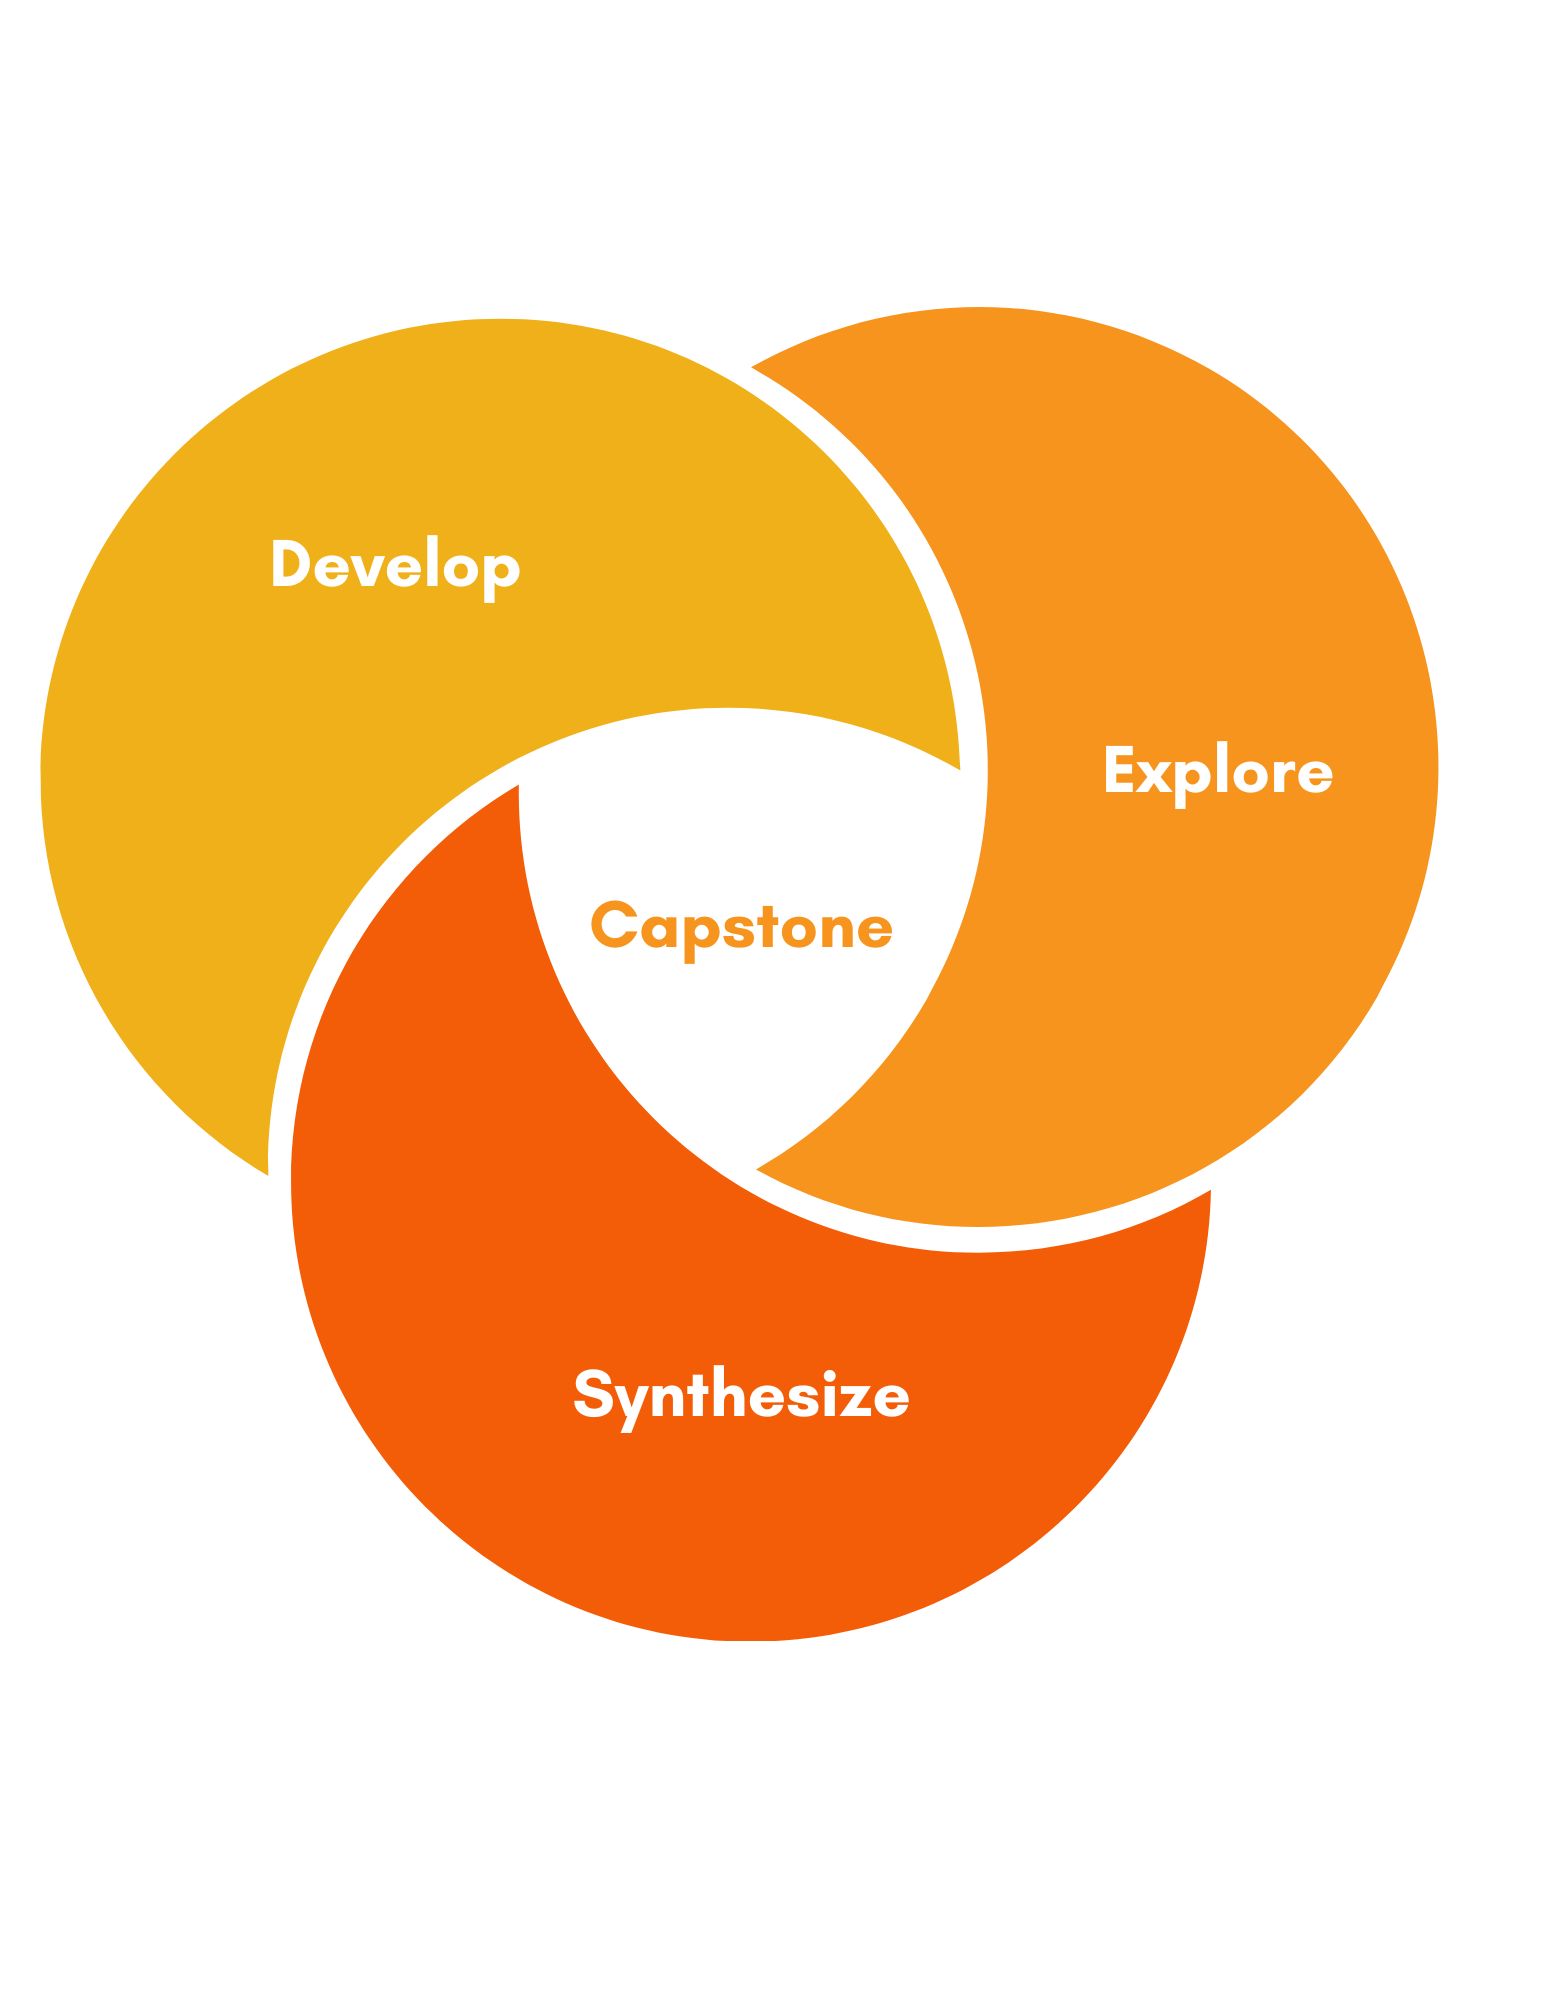 swirl graphic of explore-develop-synthesize credit areas with capstone in the center